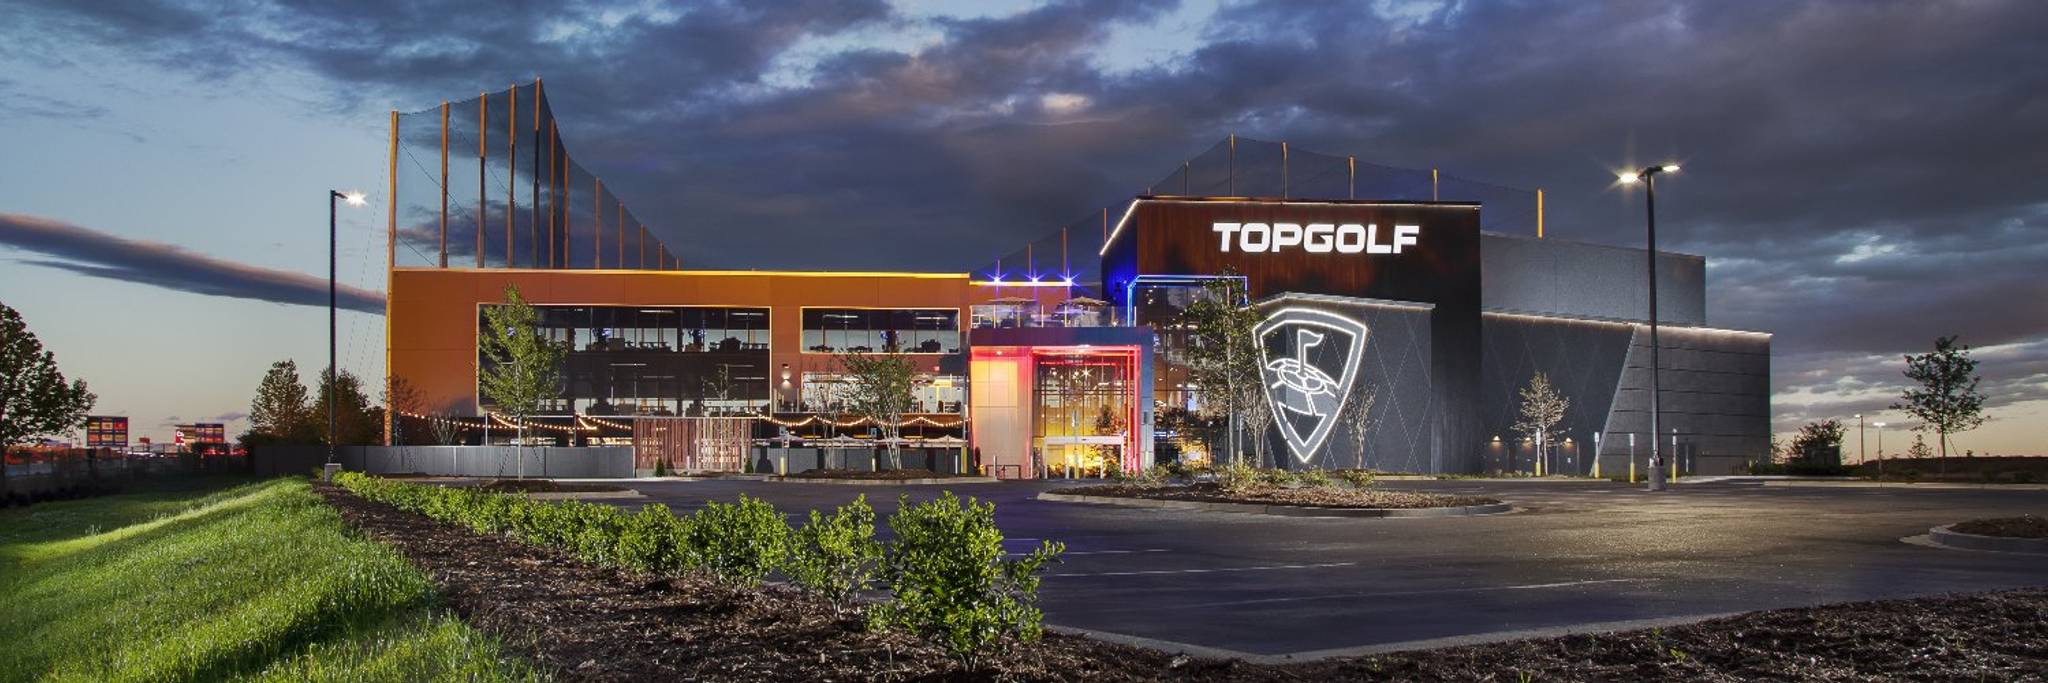 Topgolf: making golf accessible for all